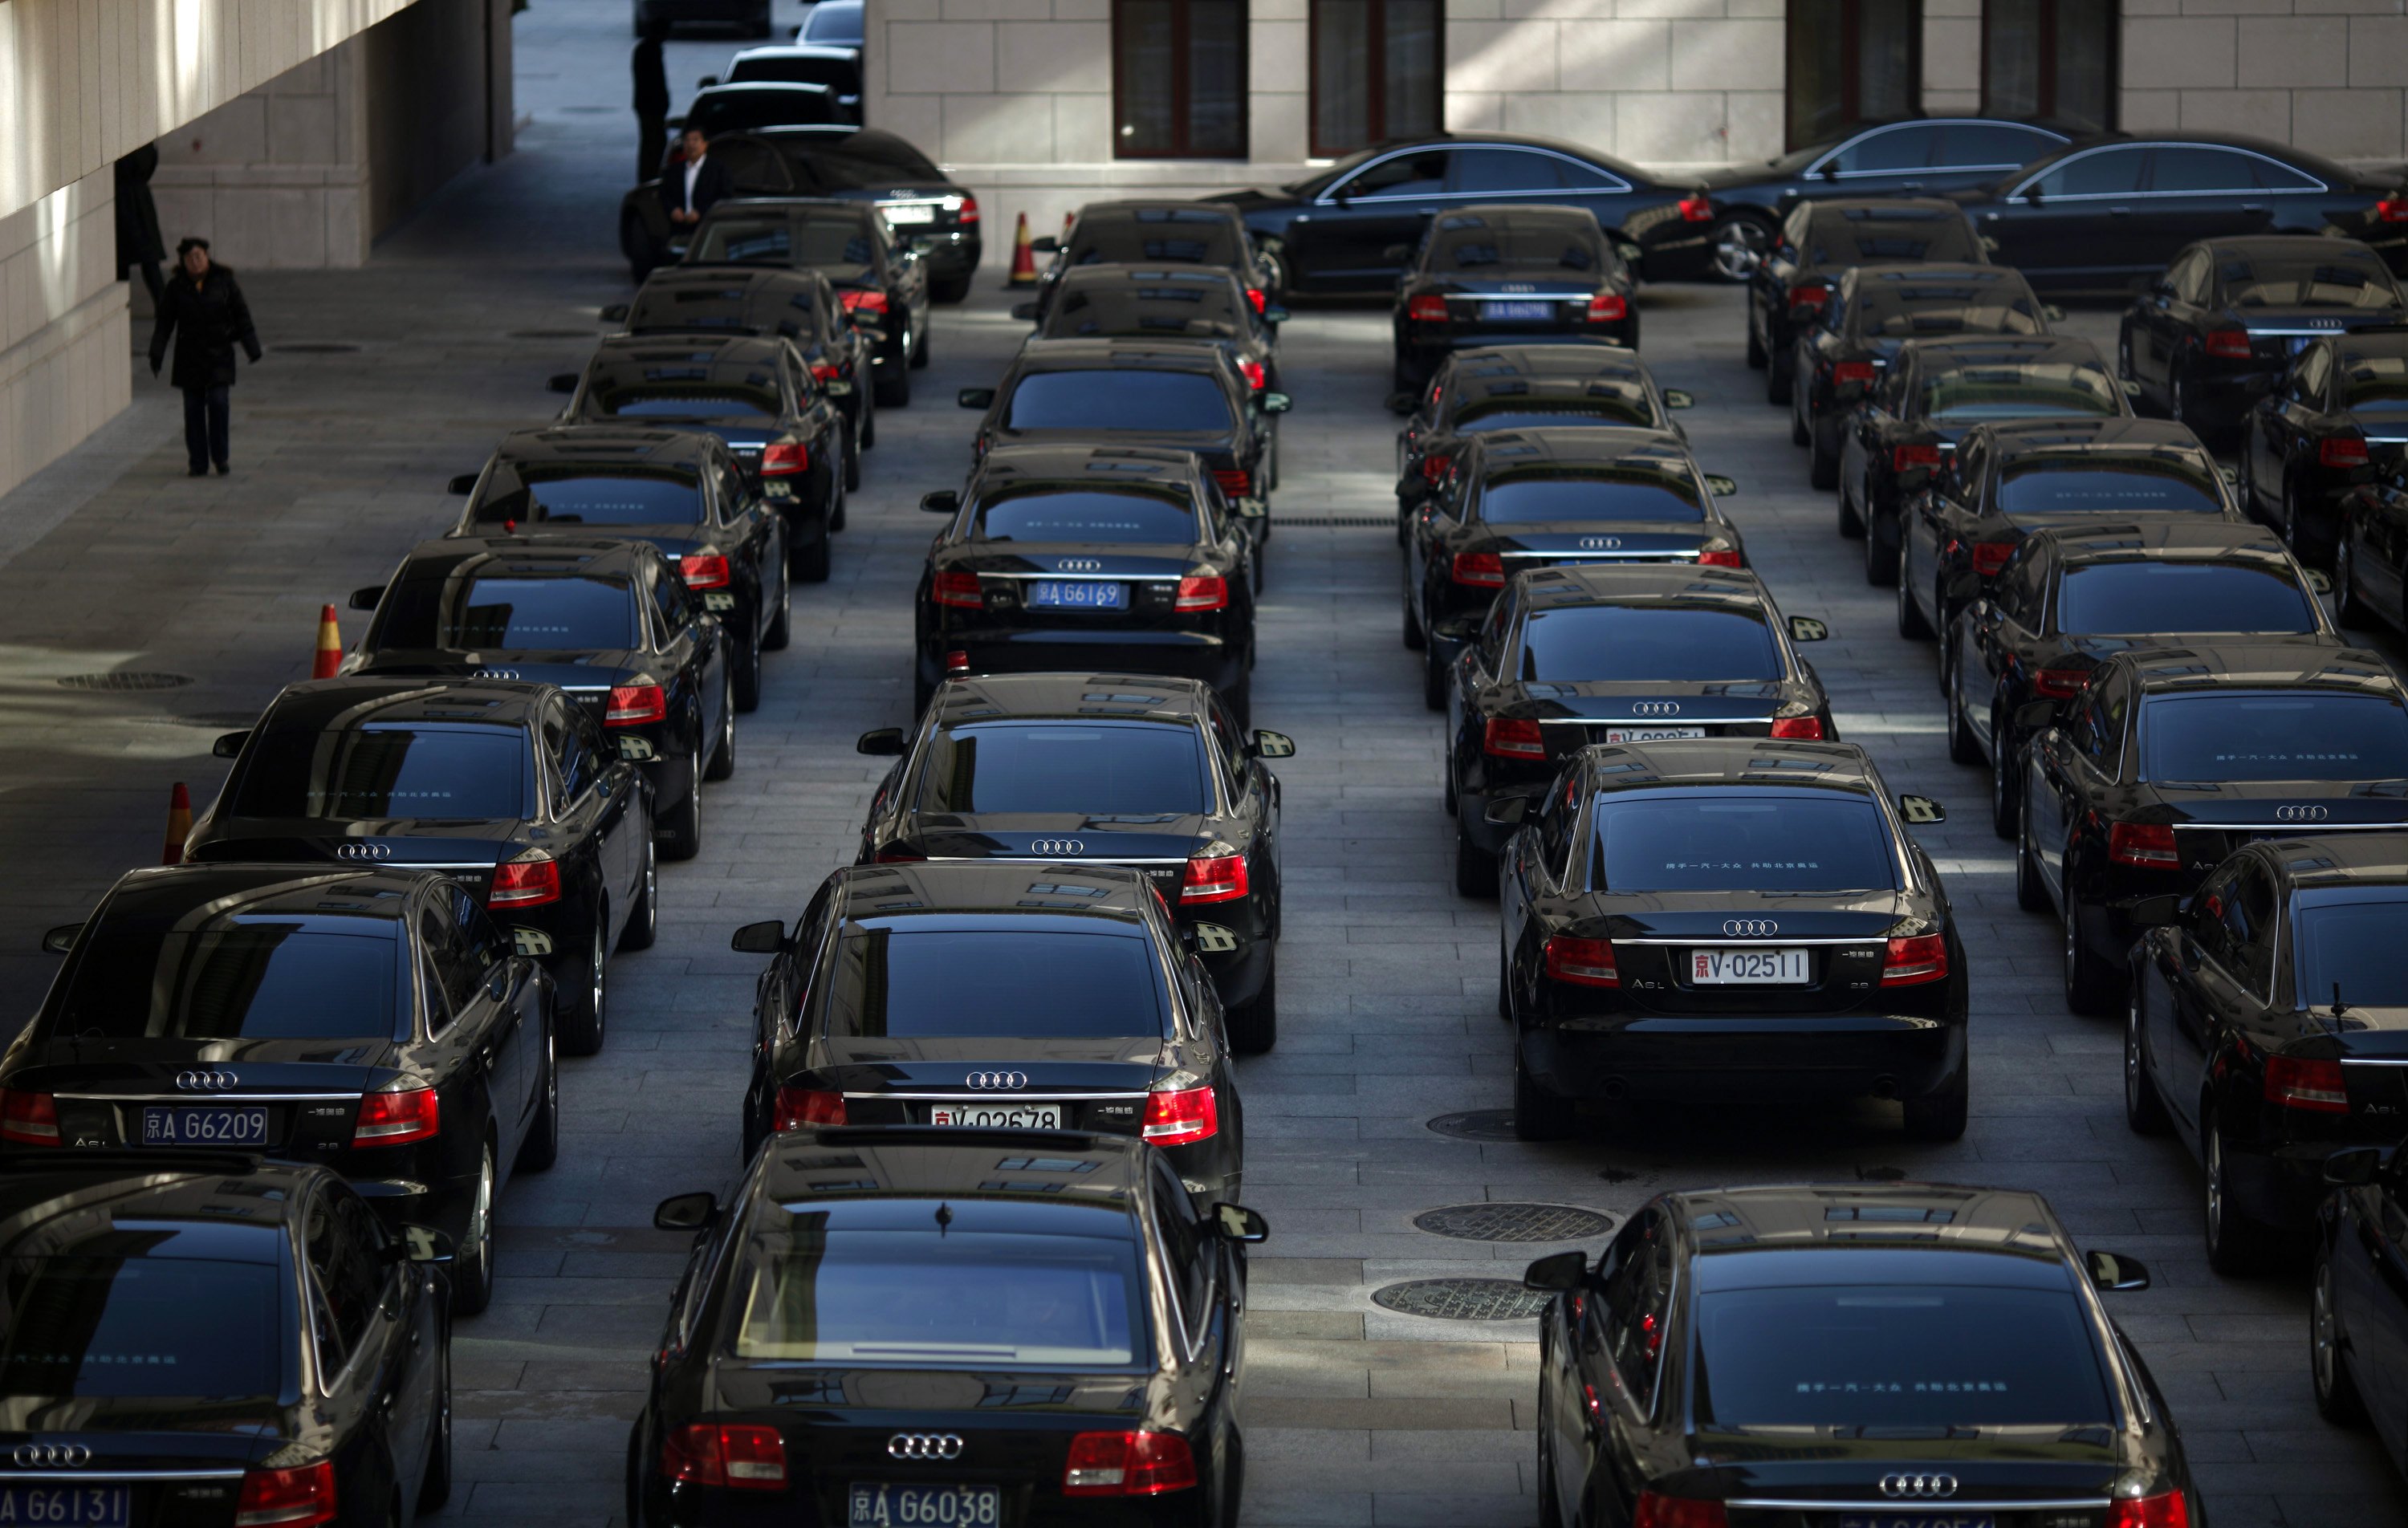 Parking has become a huge issue in Beijing in recent years. Photo: Reuters